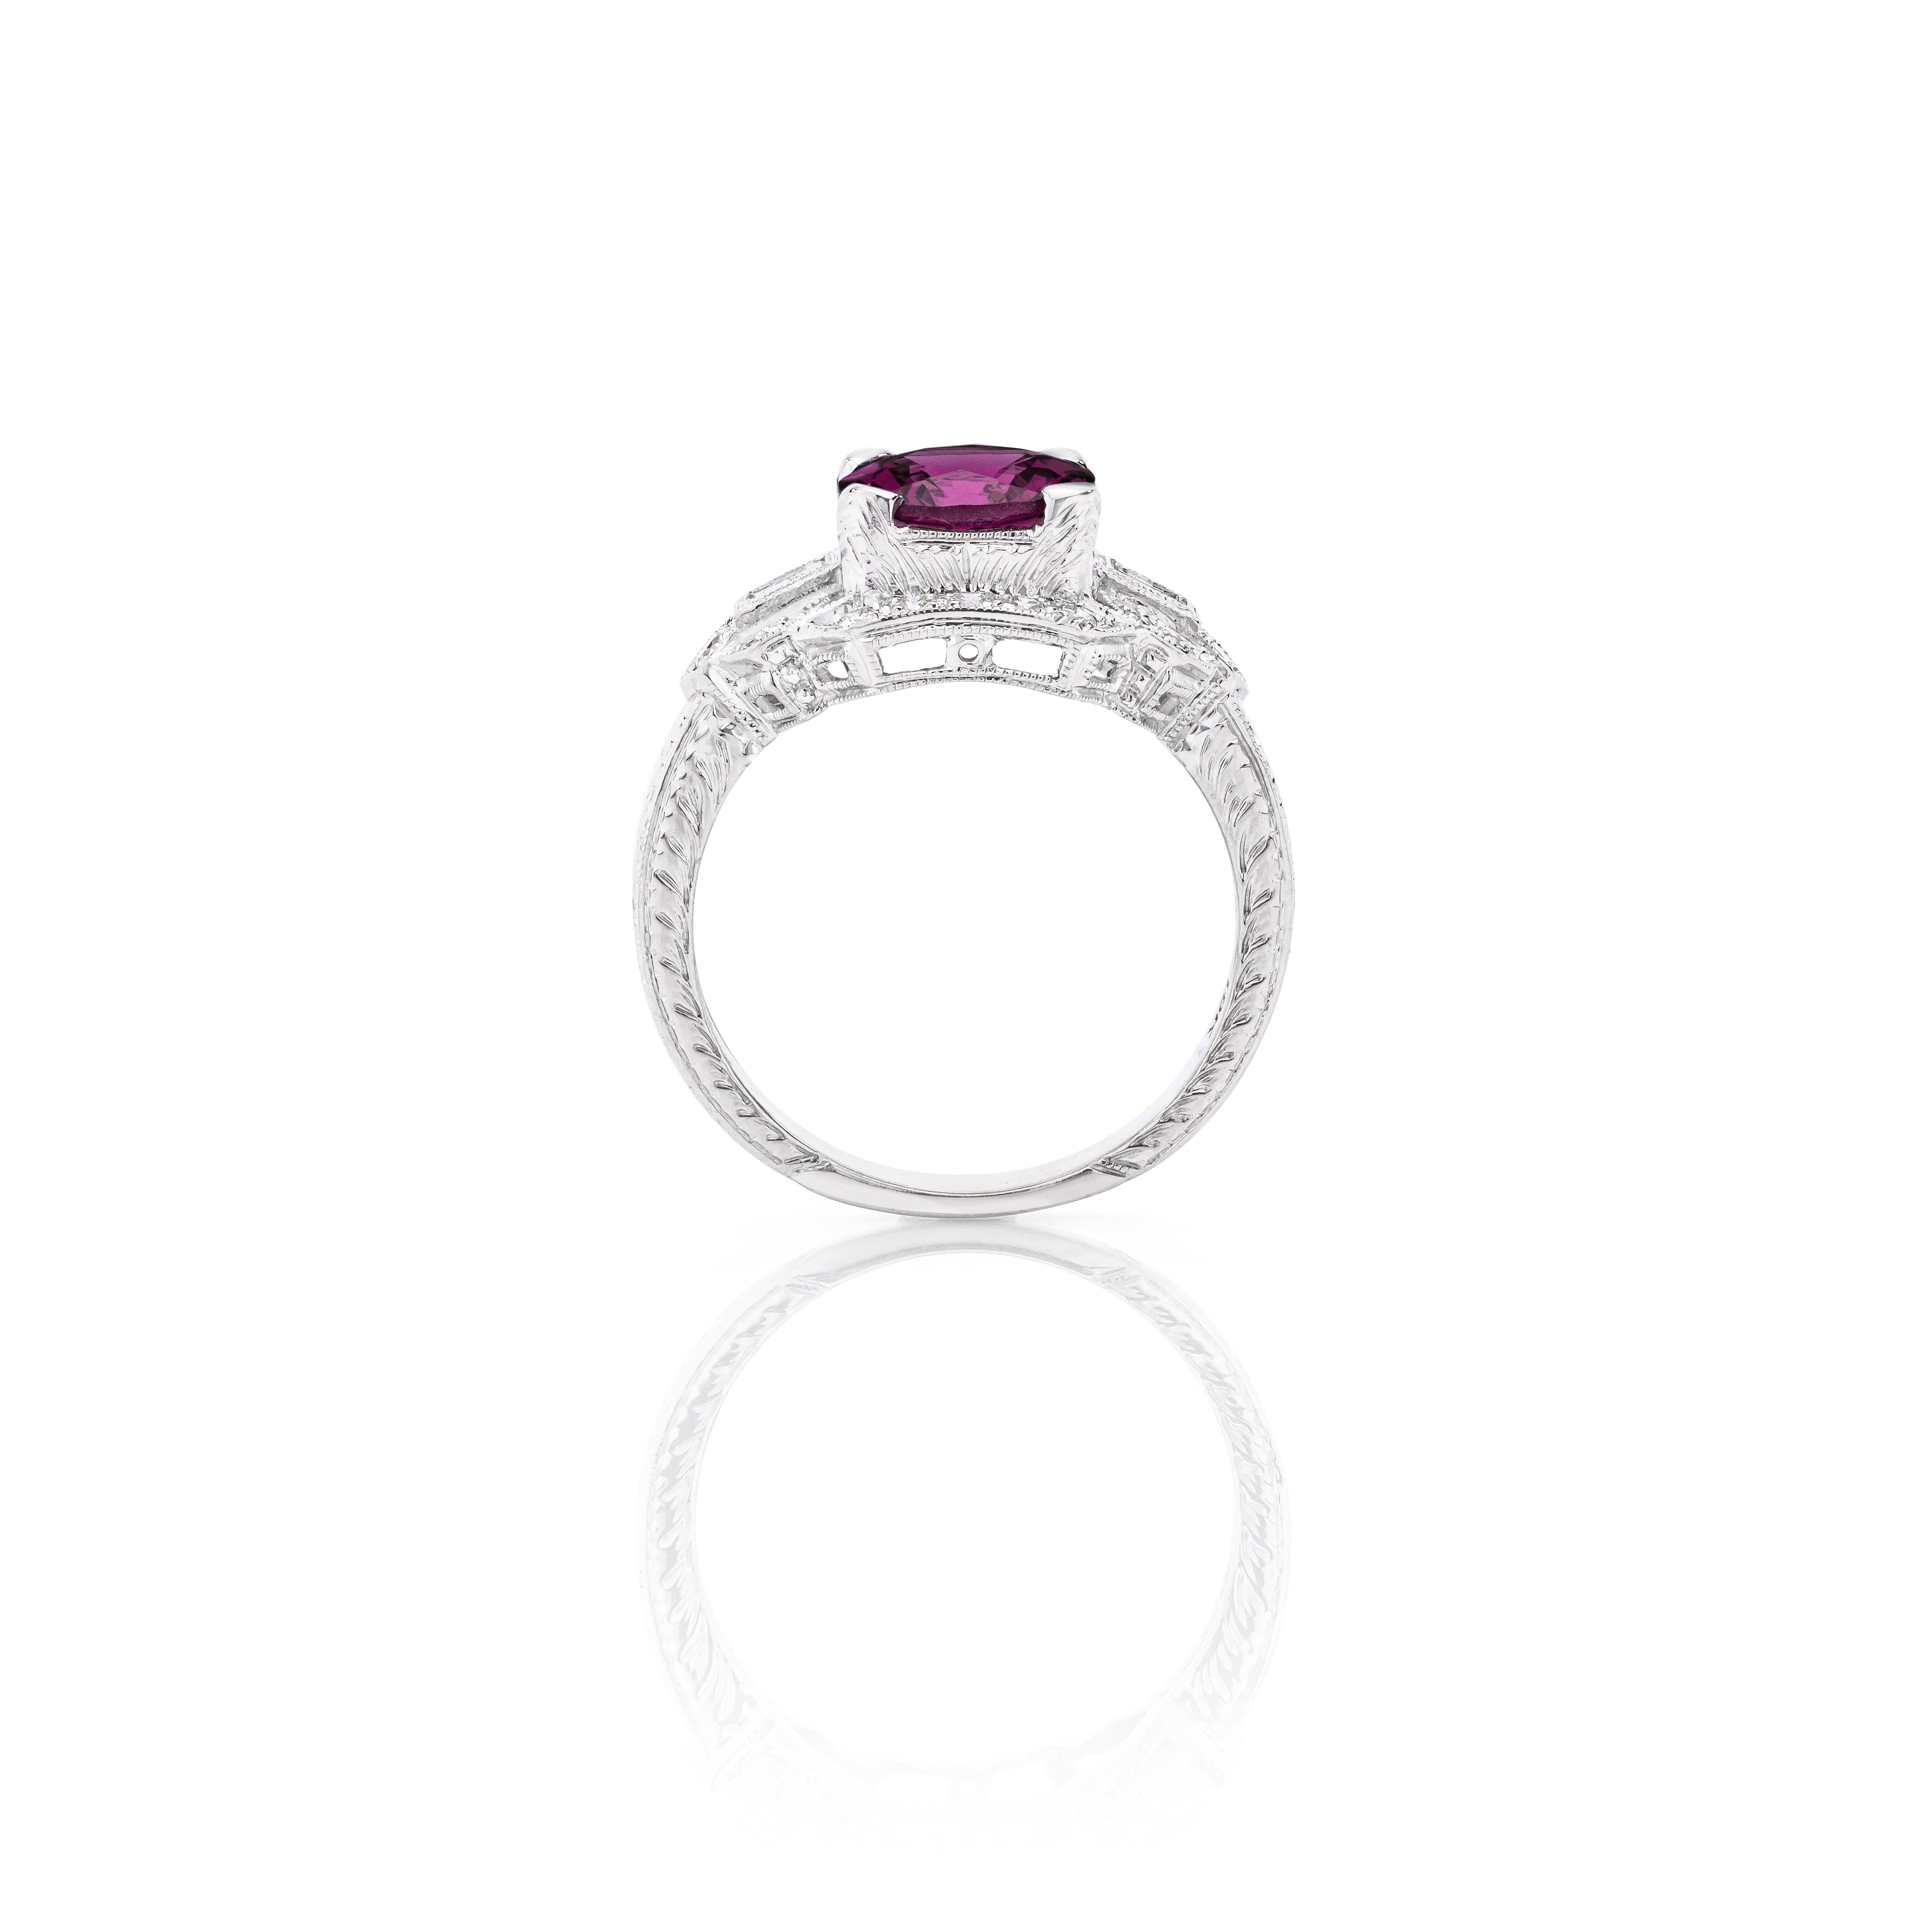 A wonderful low profile ring.  Beautiful from every angle.

Ring Details:

Round Brilliant Rhodolite Garnet weighing 1.77 Carats
(20) Round Brilliant and (2) Baguette Cut Diamonds weighing approximately 0.24 Carats

Total Gem Weight:  2.01